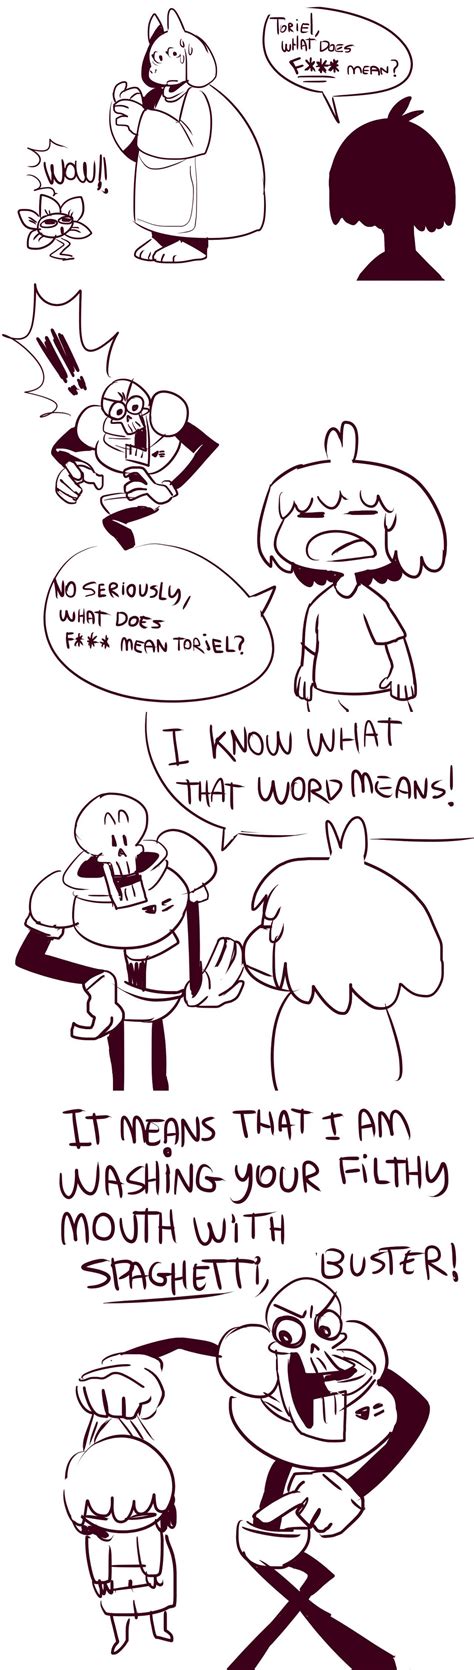 Fun Fact Frisk Got That Word From Toriel Undertale Know Your Meme